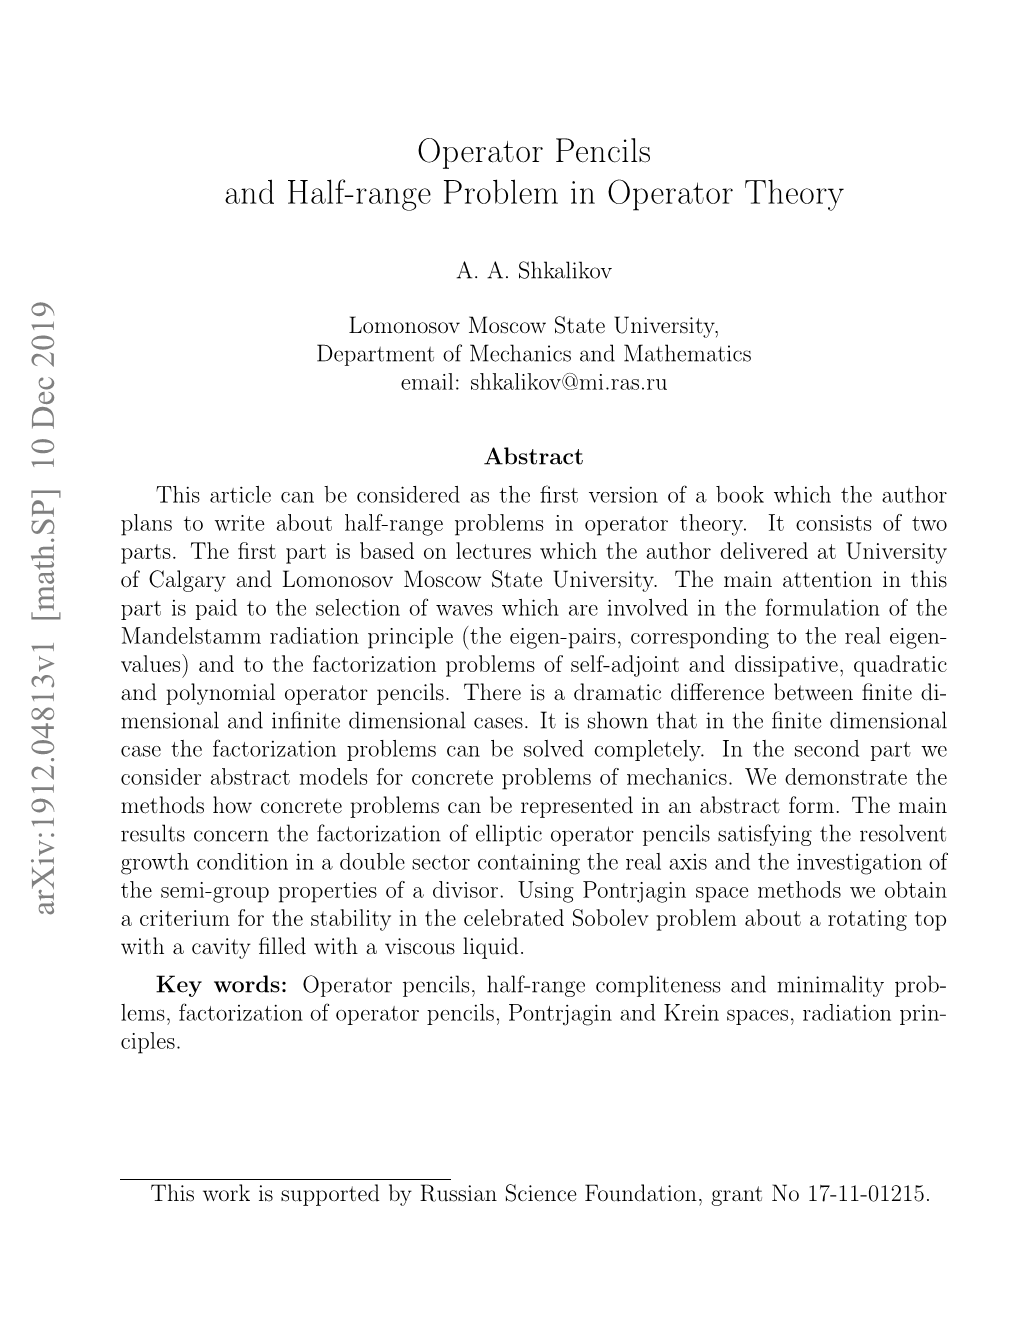 Operator Pencils and Half-Range Problem in Operator Theory